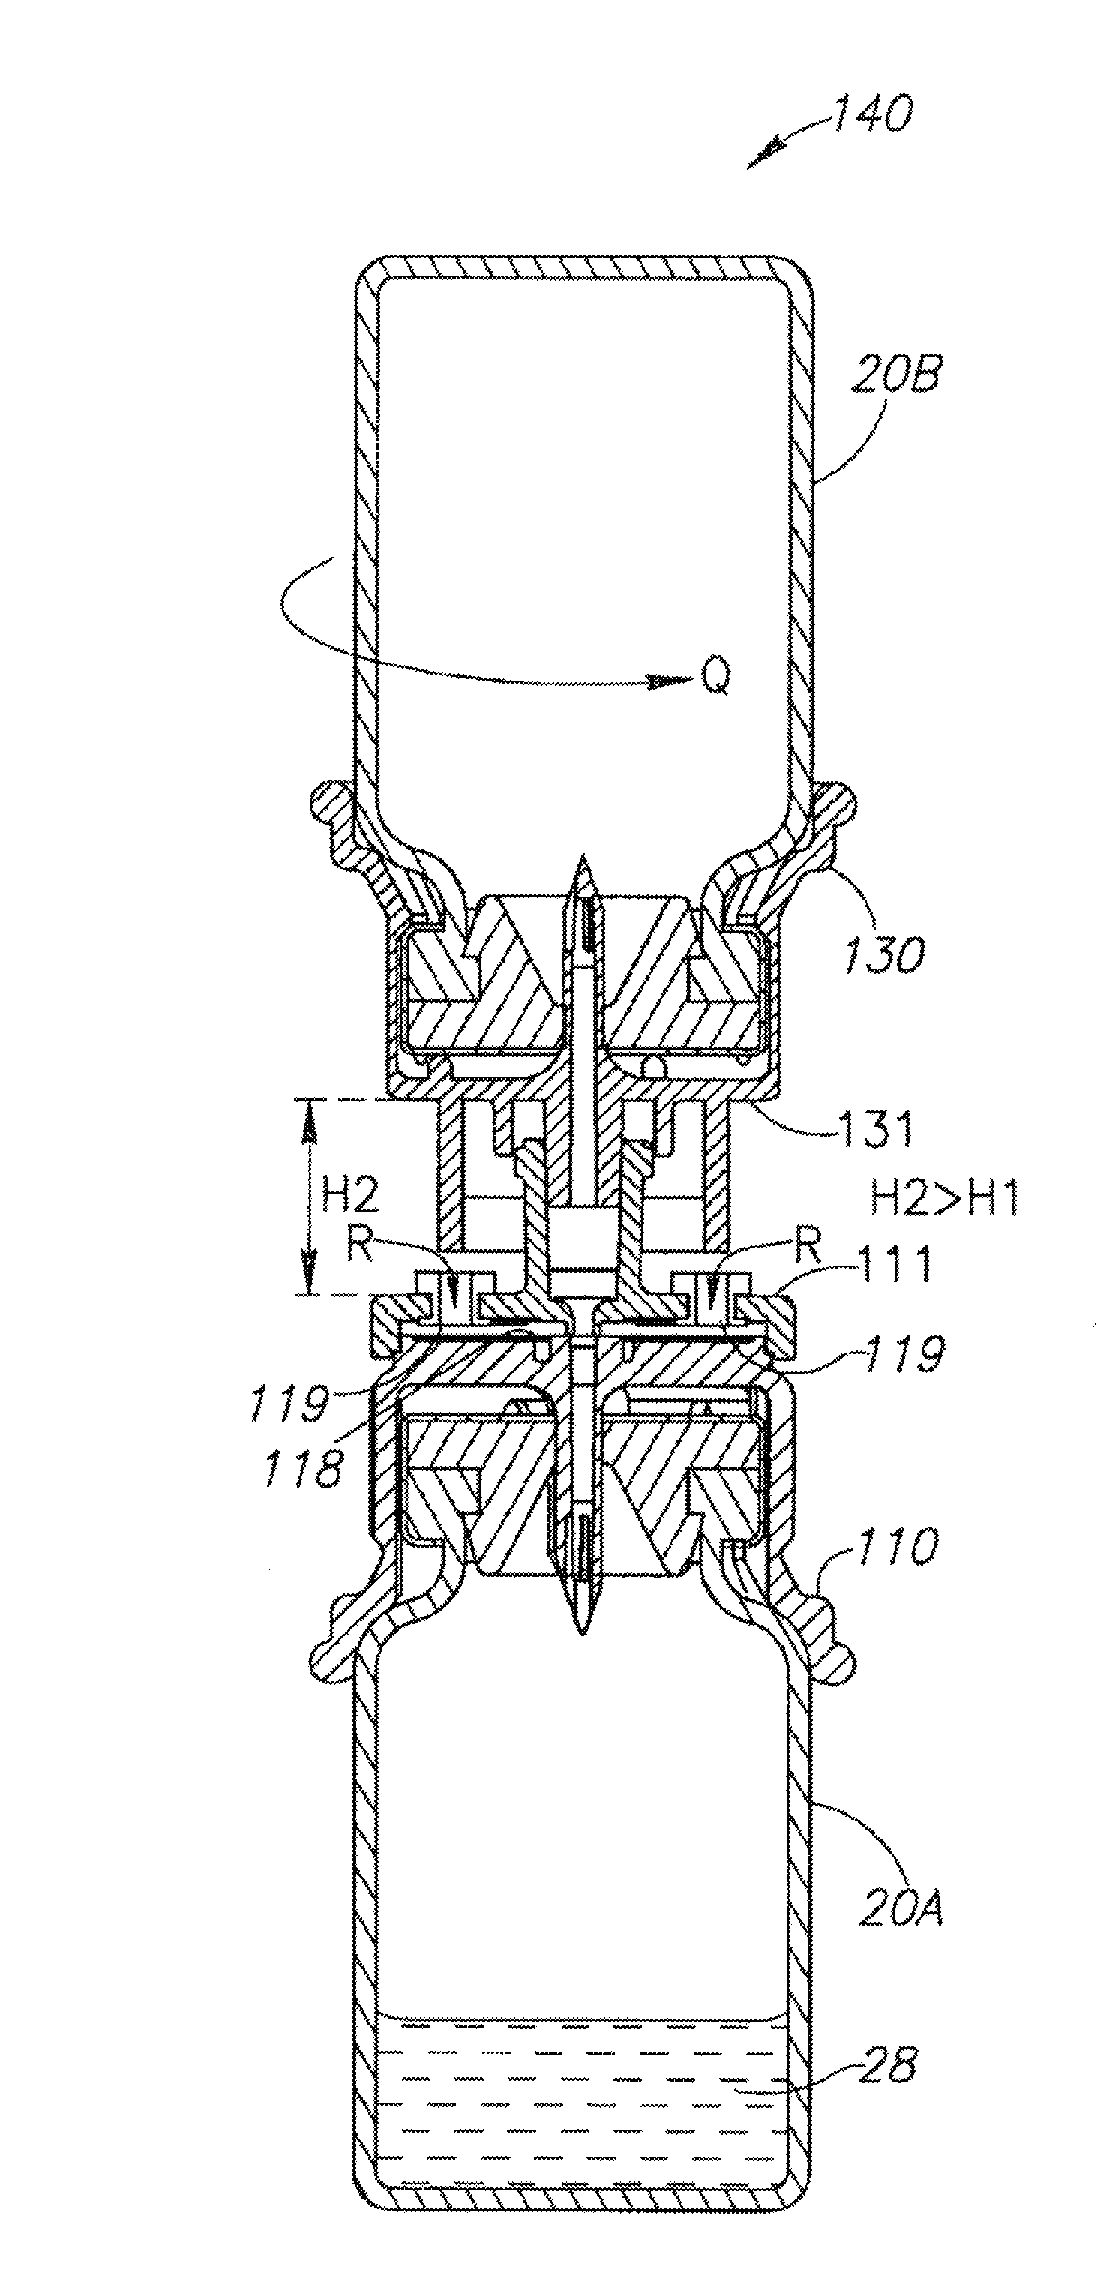 Fluid transfer assembly with venting arrangement